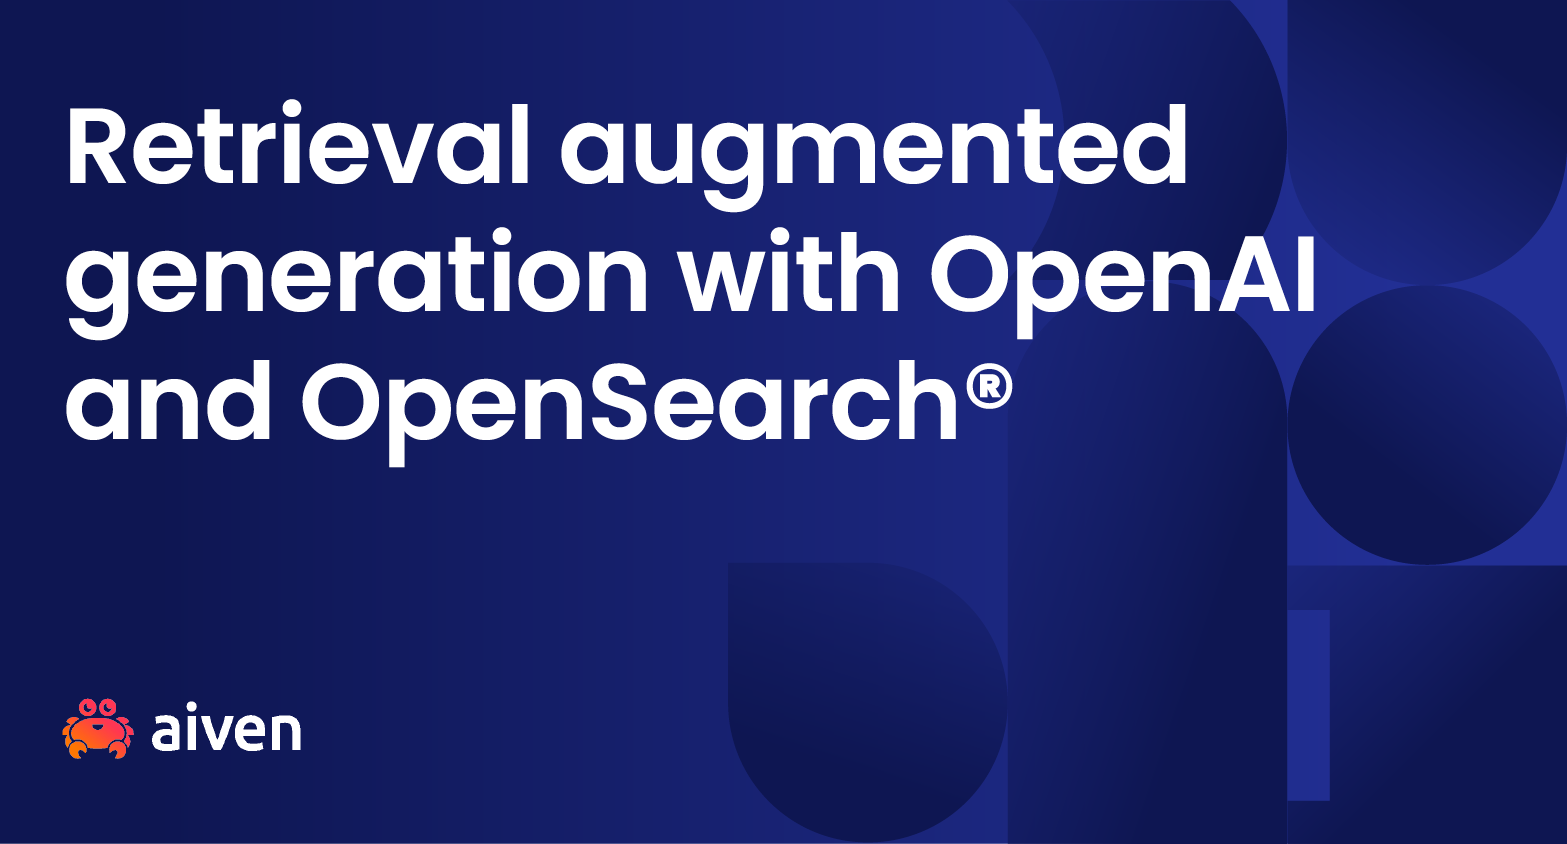 Retrieval augmented generation with OpenAI and OpenSearch® illustration